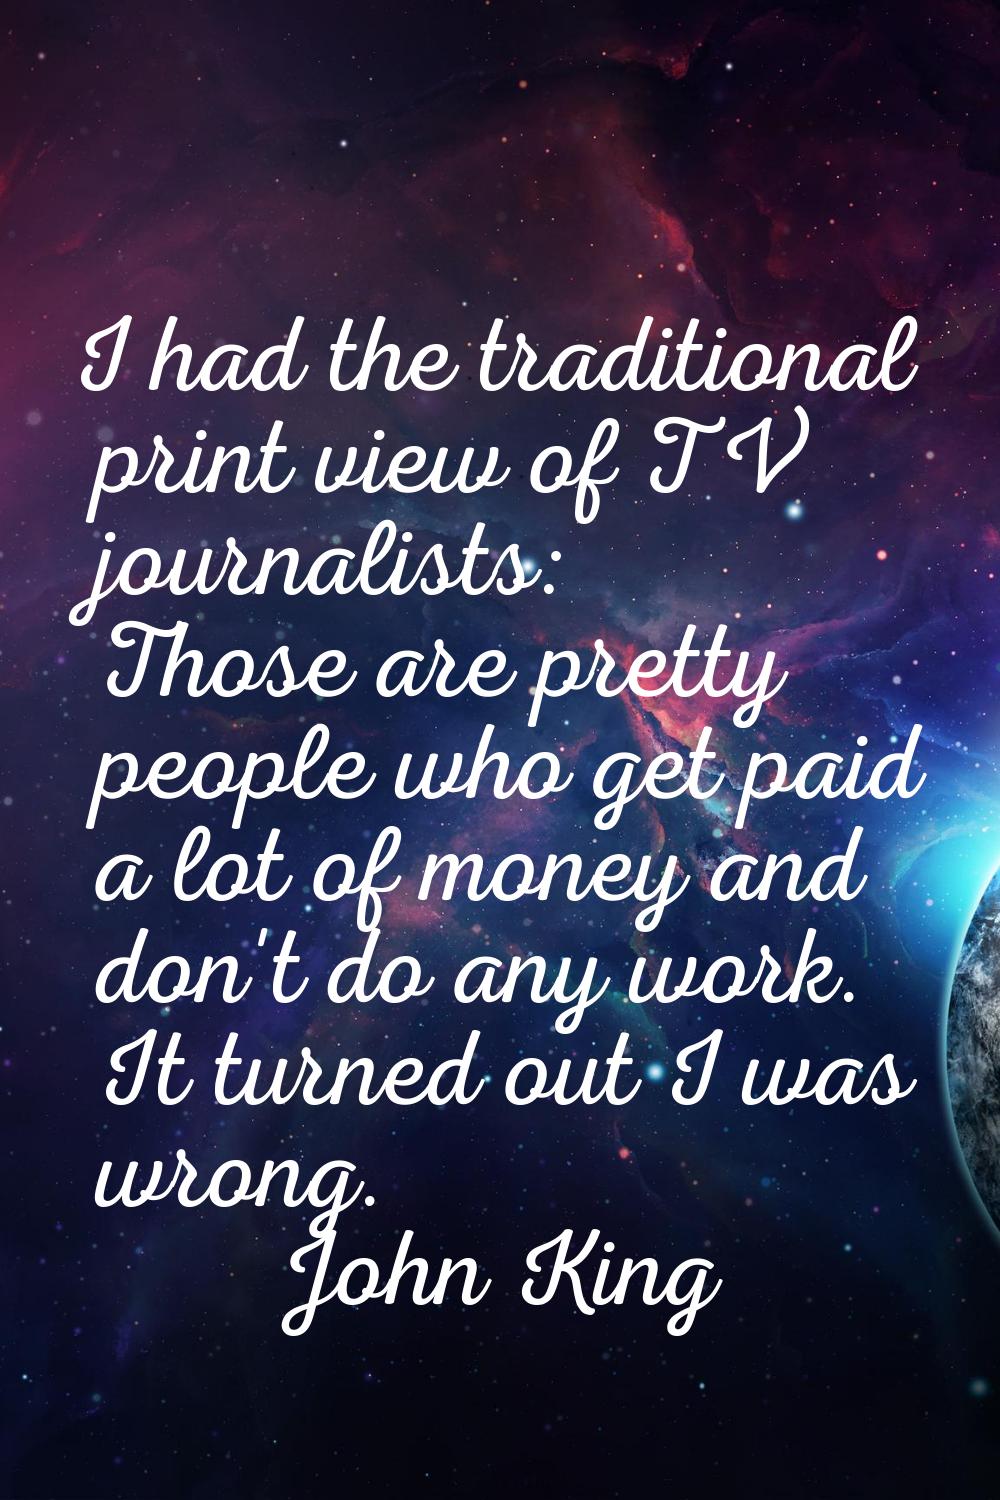 I had the traditional print view of TV journalists: Those are pretty people who get paid a lot of m